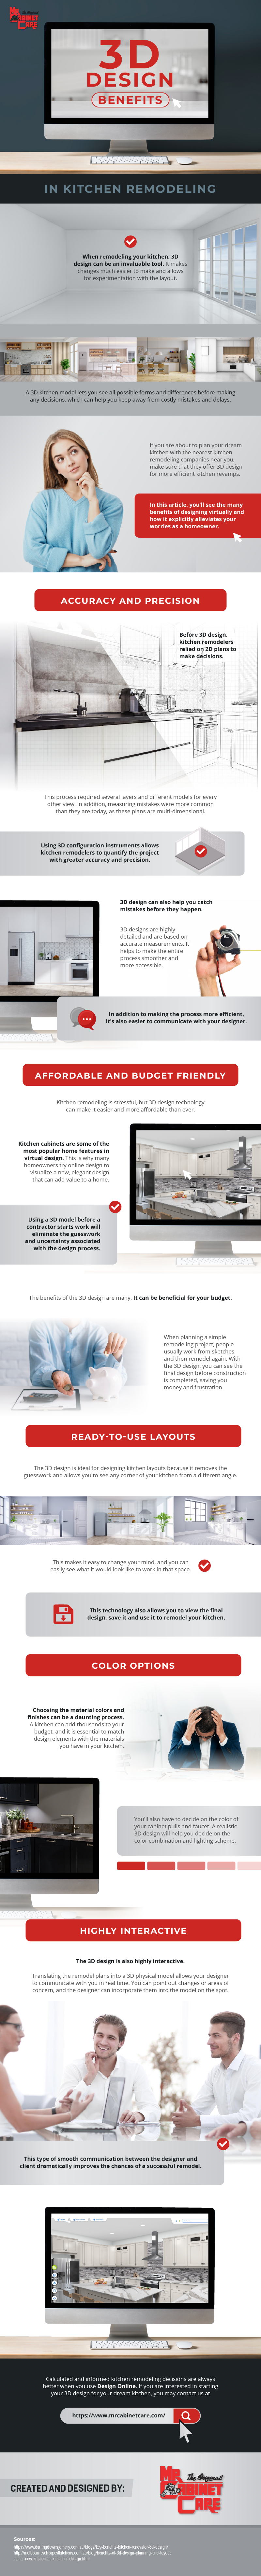 3D Design Benefits in Kitchen Remodeling | Infographic